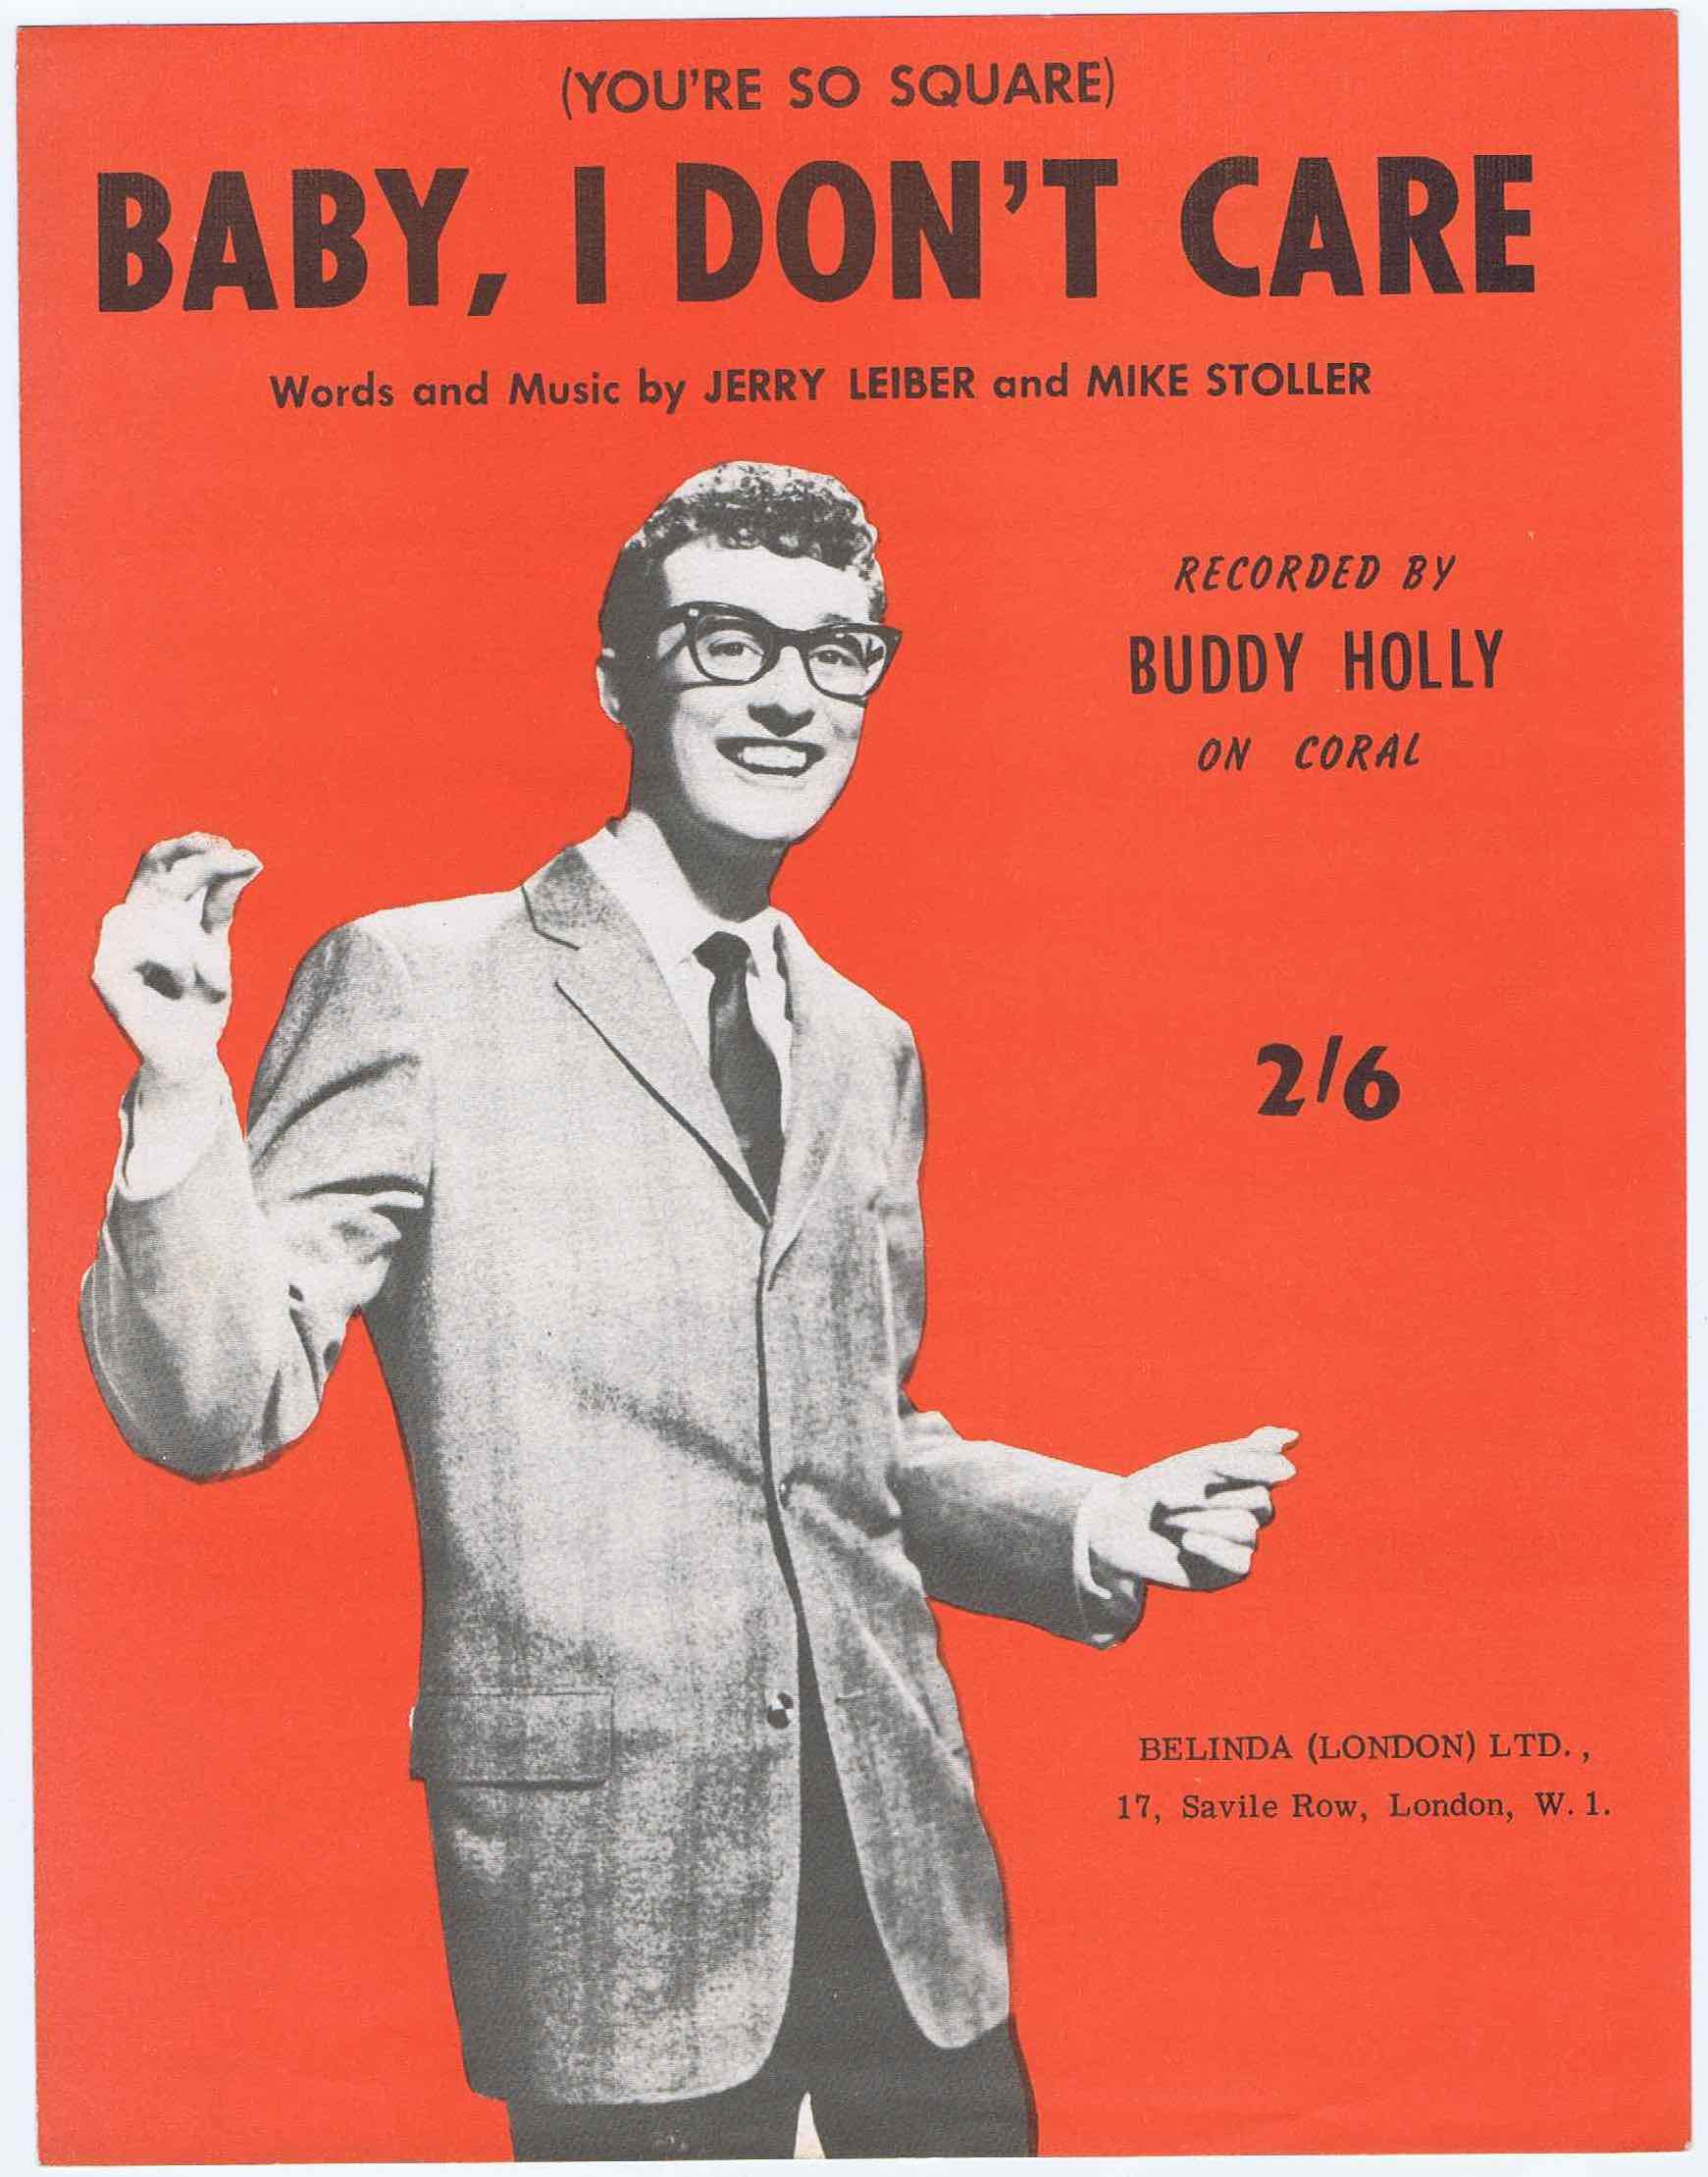 J300	(YOU’RE SO SQUARE) BABY I DON’T CARE - BUDDY HOLLY